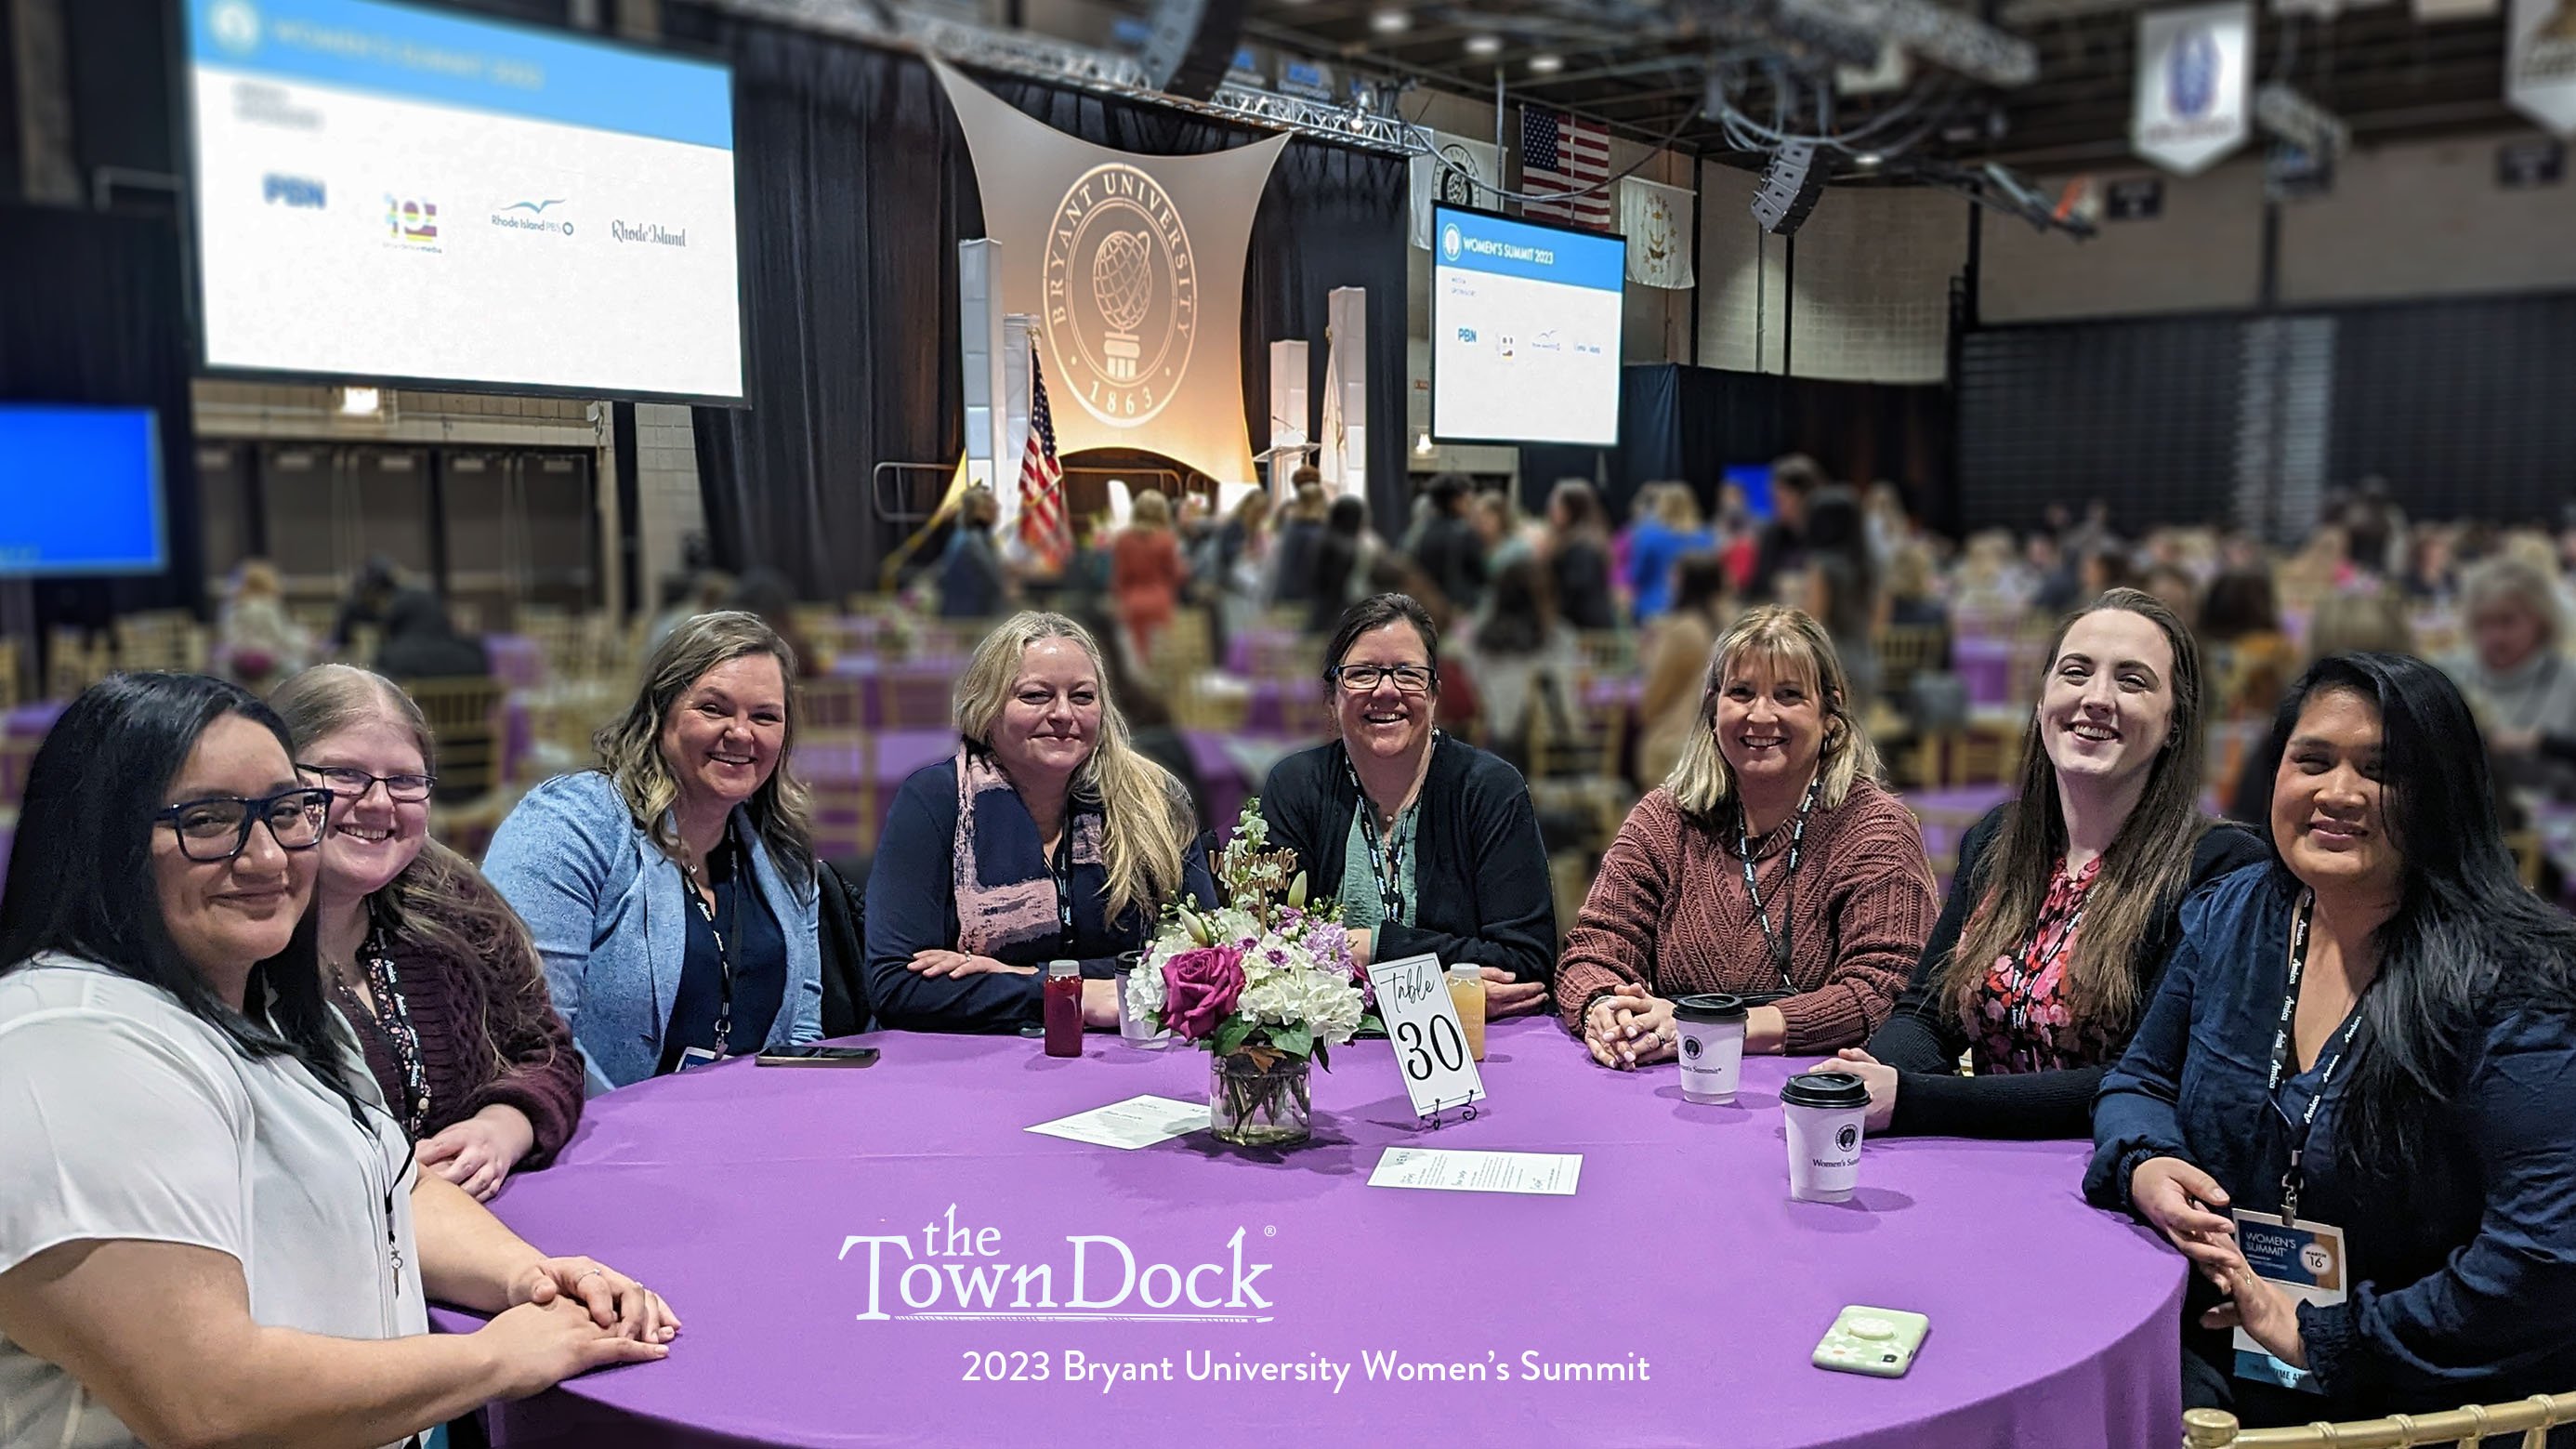 A group of women team members from The Town Dock sit around a purple table. The Bryant University mainstage is in the background.